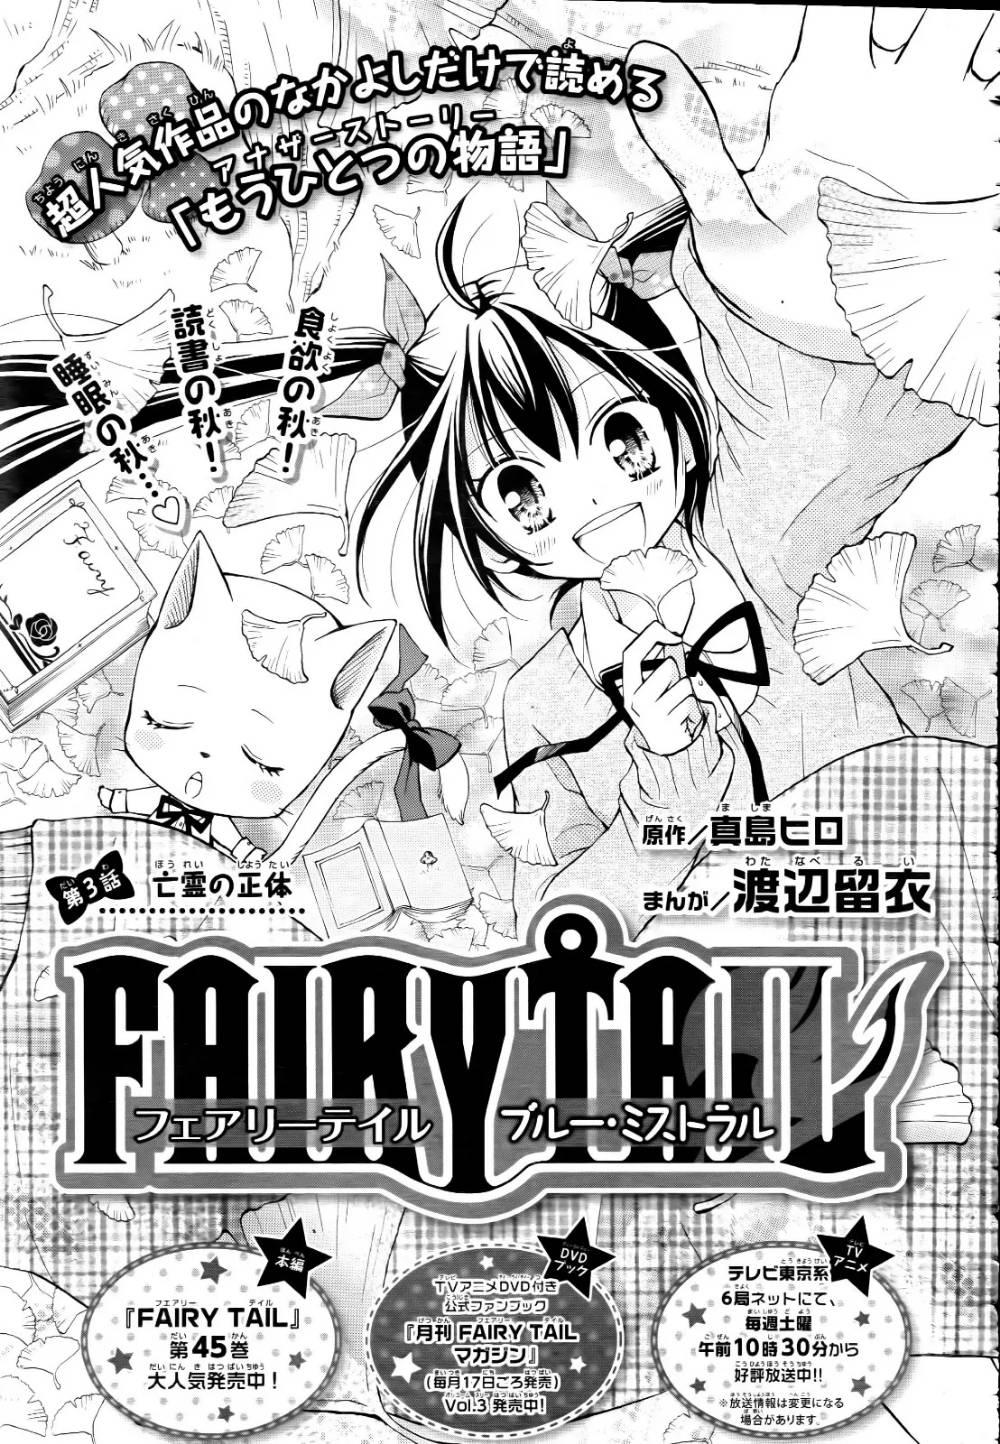 Fairy Tail - Blue Mistral - episode 3 - 0